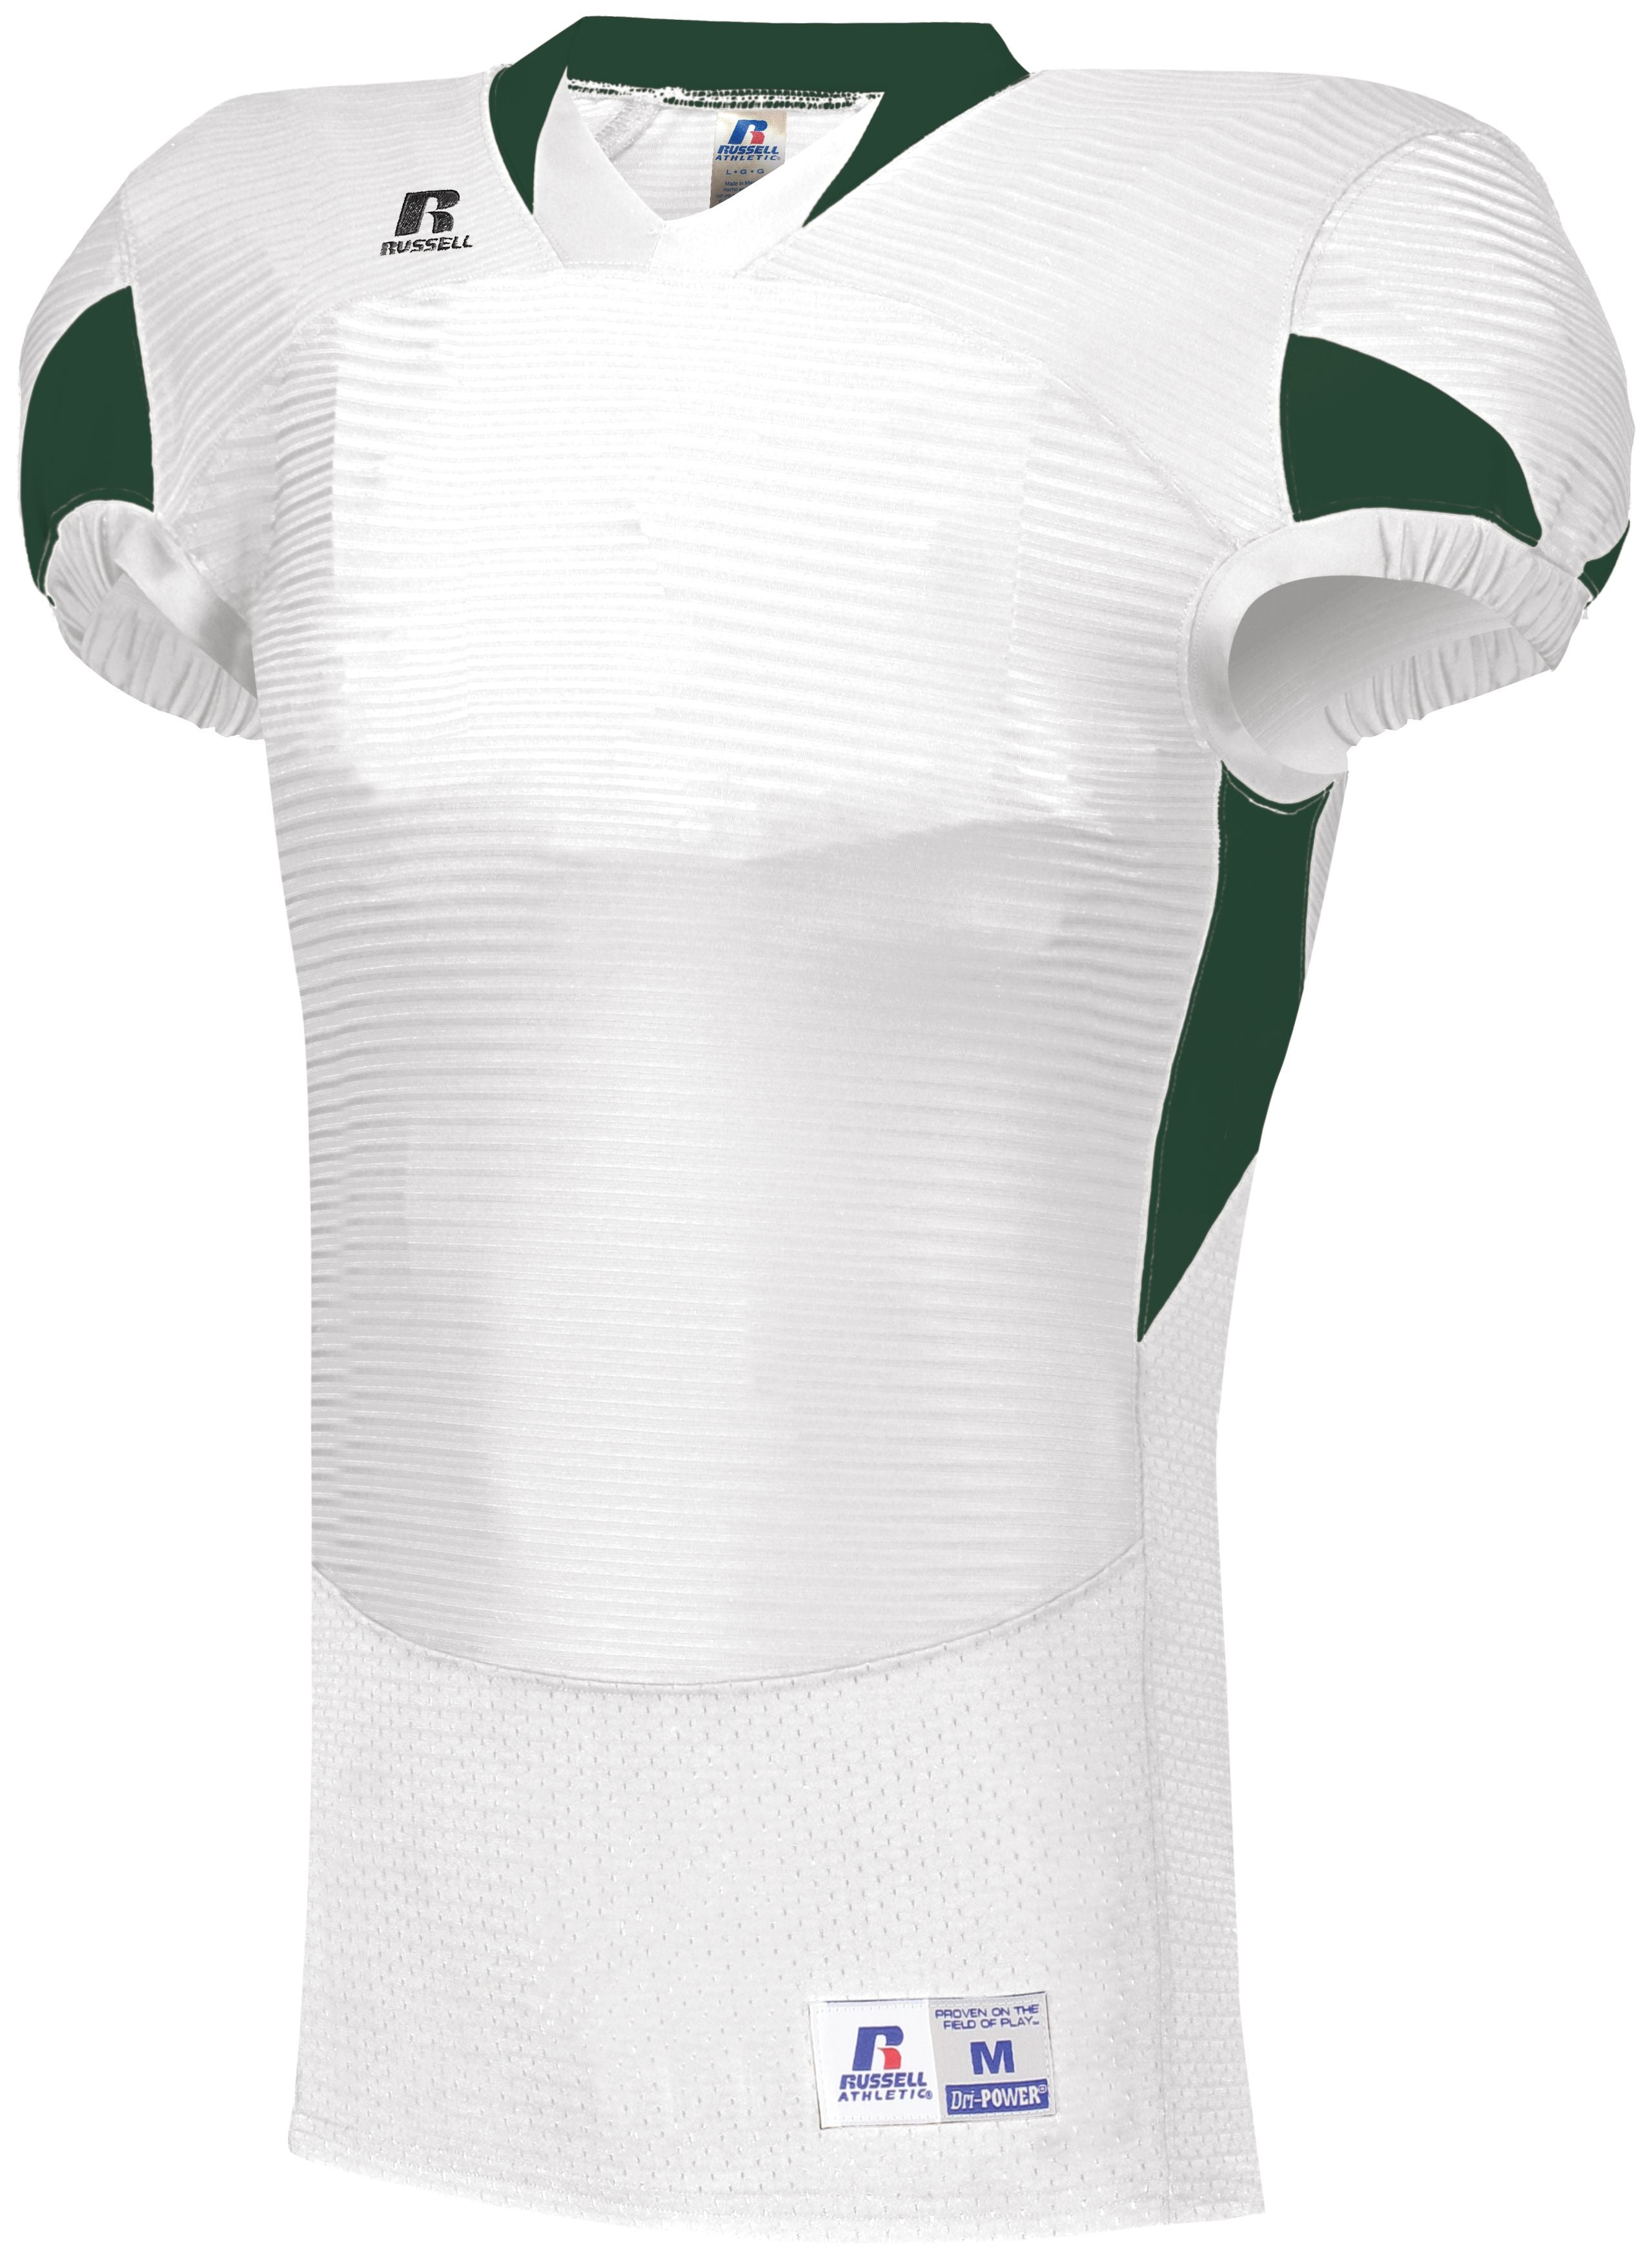 Russell Athletic Waist Length Football Jersey in White/Dark Green  -Part of the Adult, Adult-Jersey, Football, Russell-Athletic-Products, Shirts, All-Sports, All-Sports-1 product lines at KanaleyCreations.com